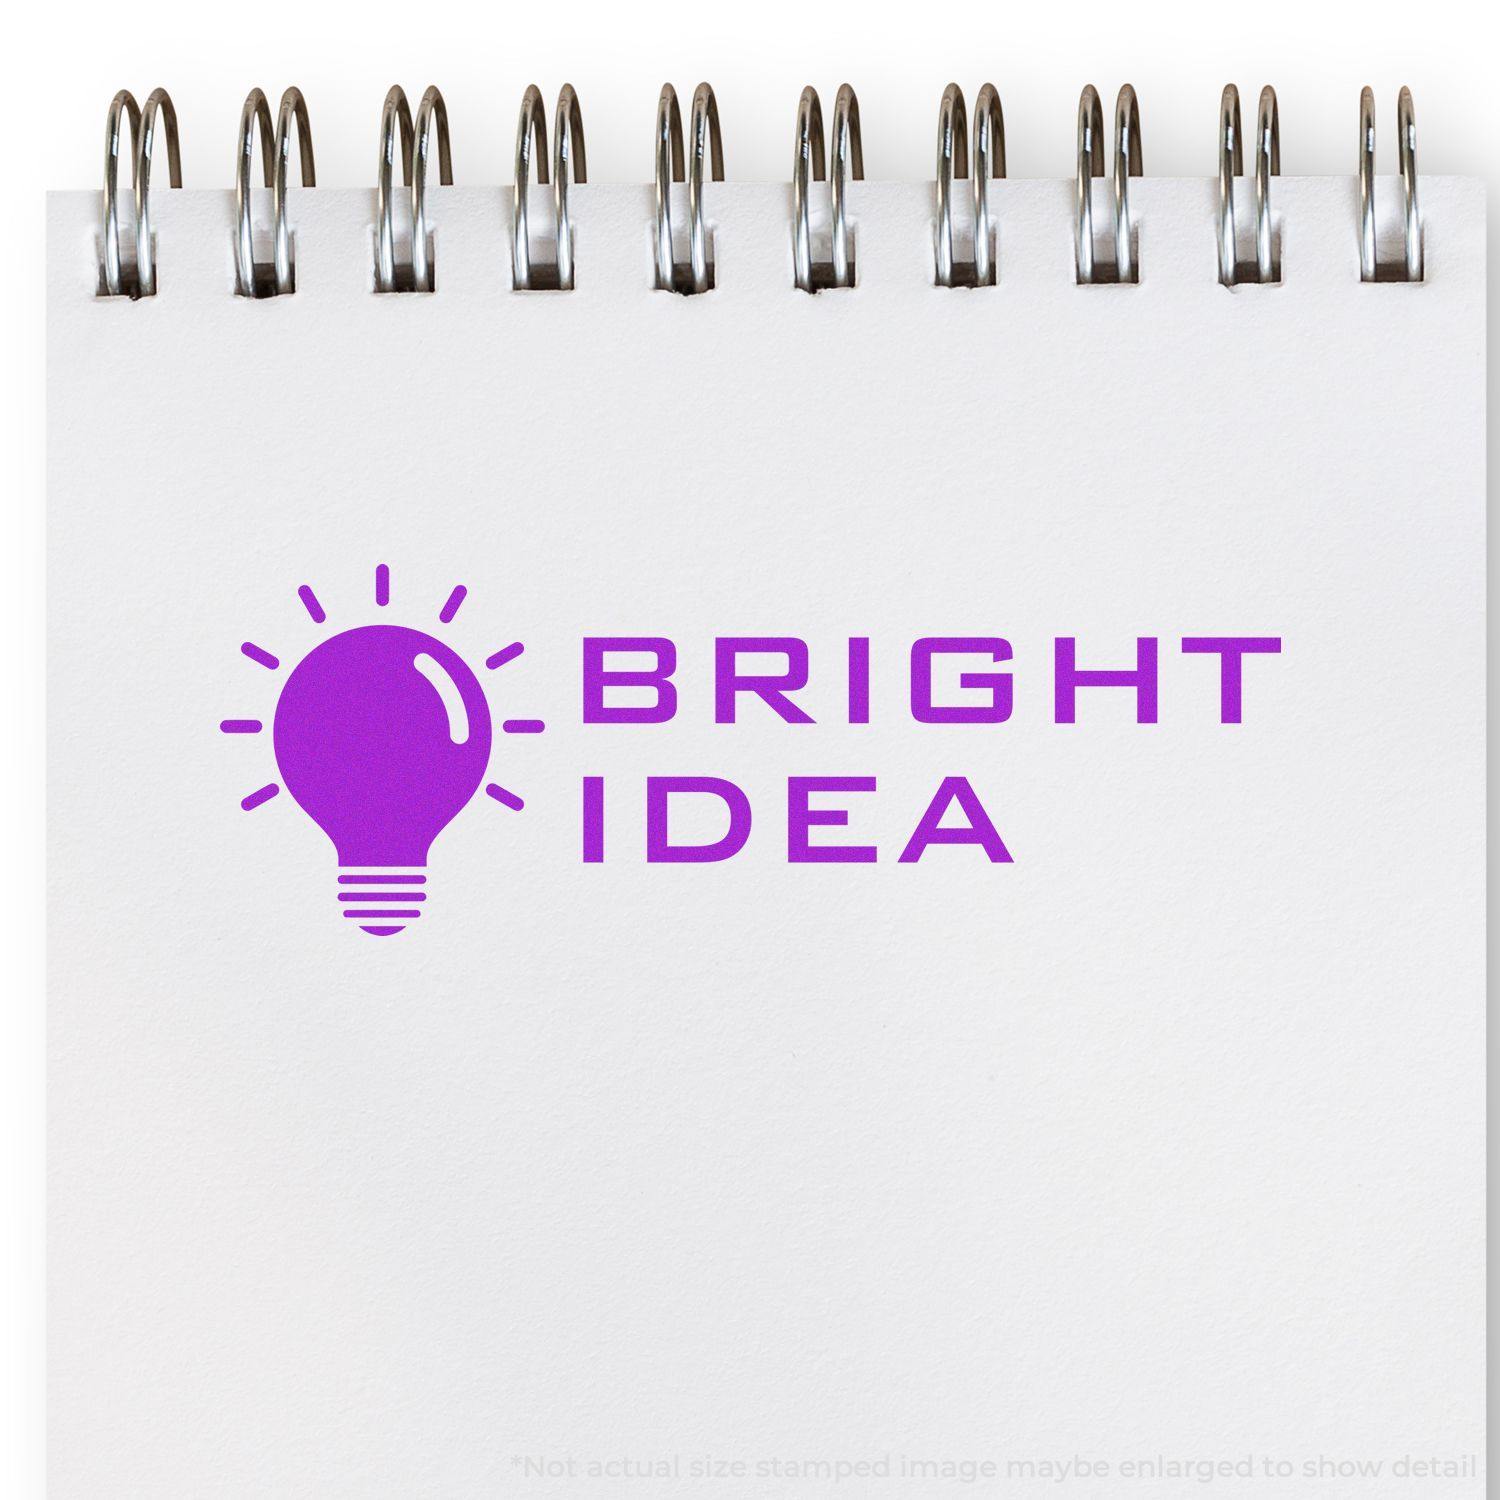 A stock office pre-inked stamp with a stamped image showing how the text "BRIGHT IDEA" in a tech-style font with an image of a bright lightbulb on the left is displayed after stamping.